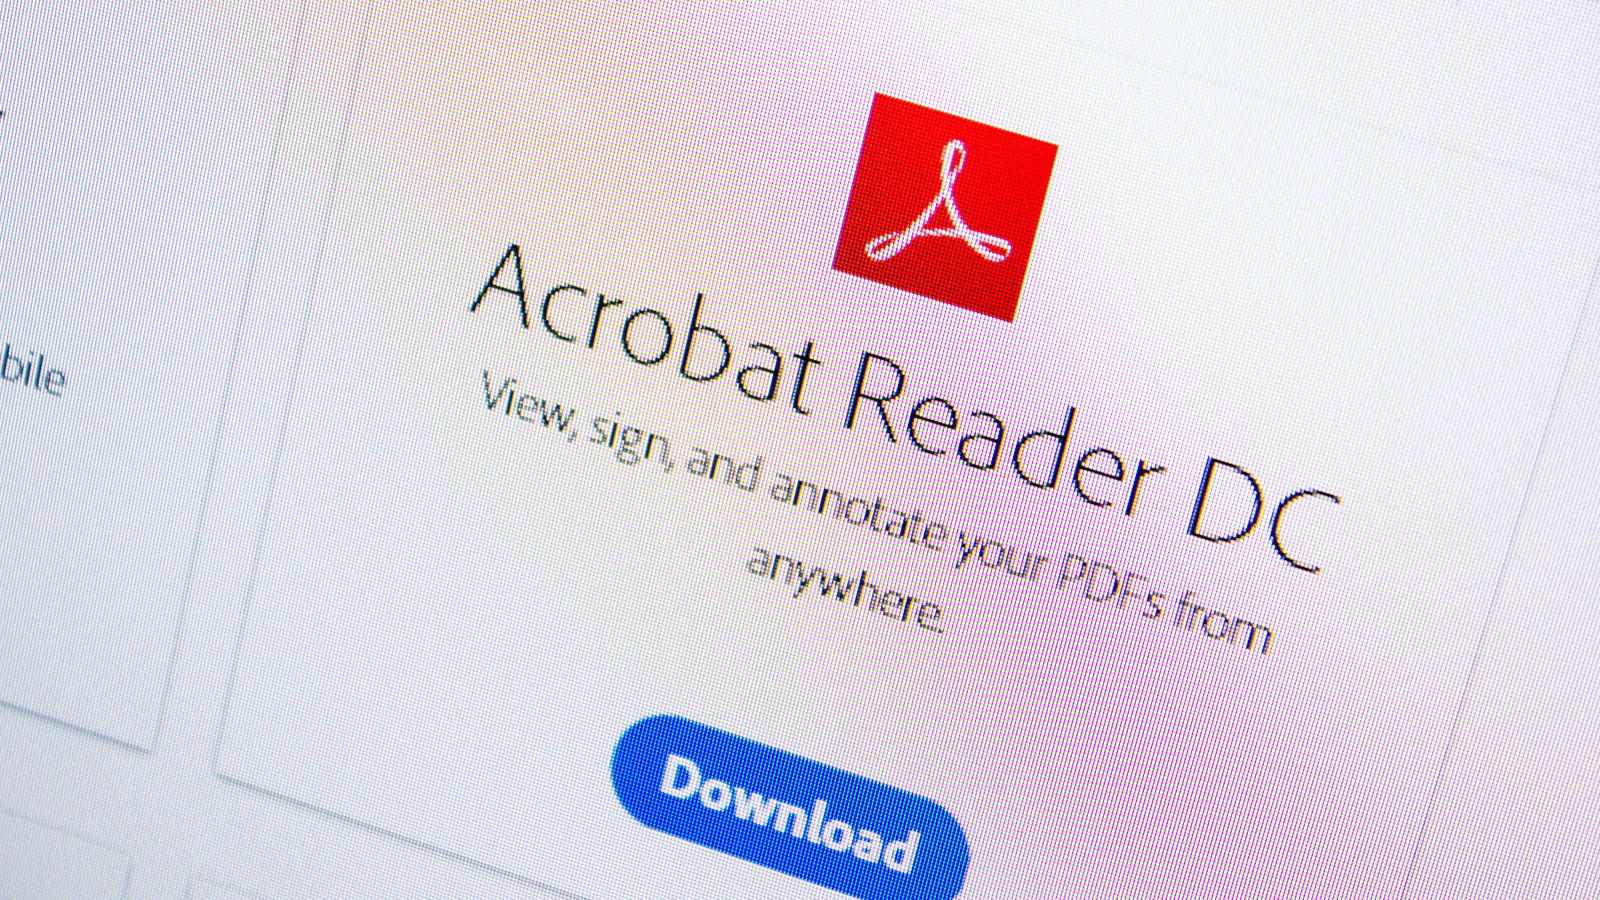 Security researchers found that Adobe Acrobat is trying to block security software from having visibility into the PDF files it opens, creating a secu